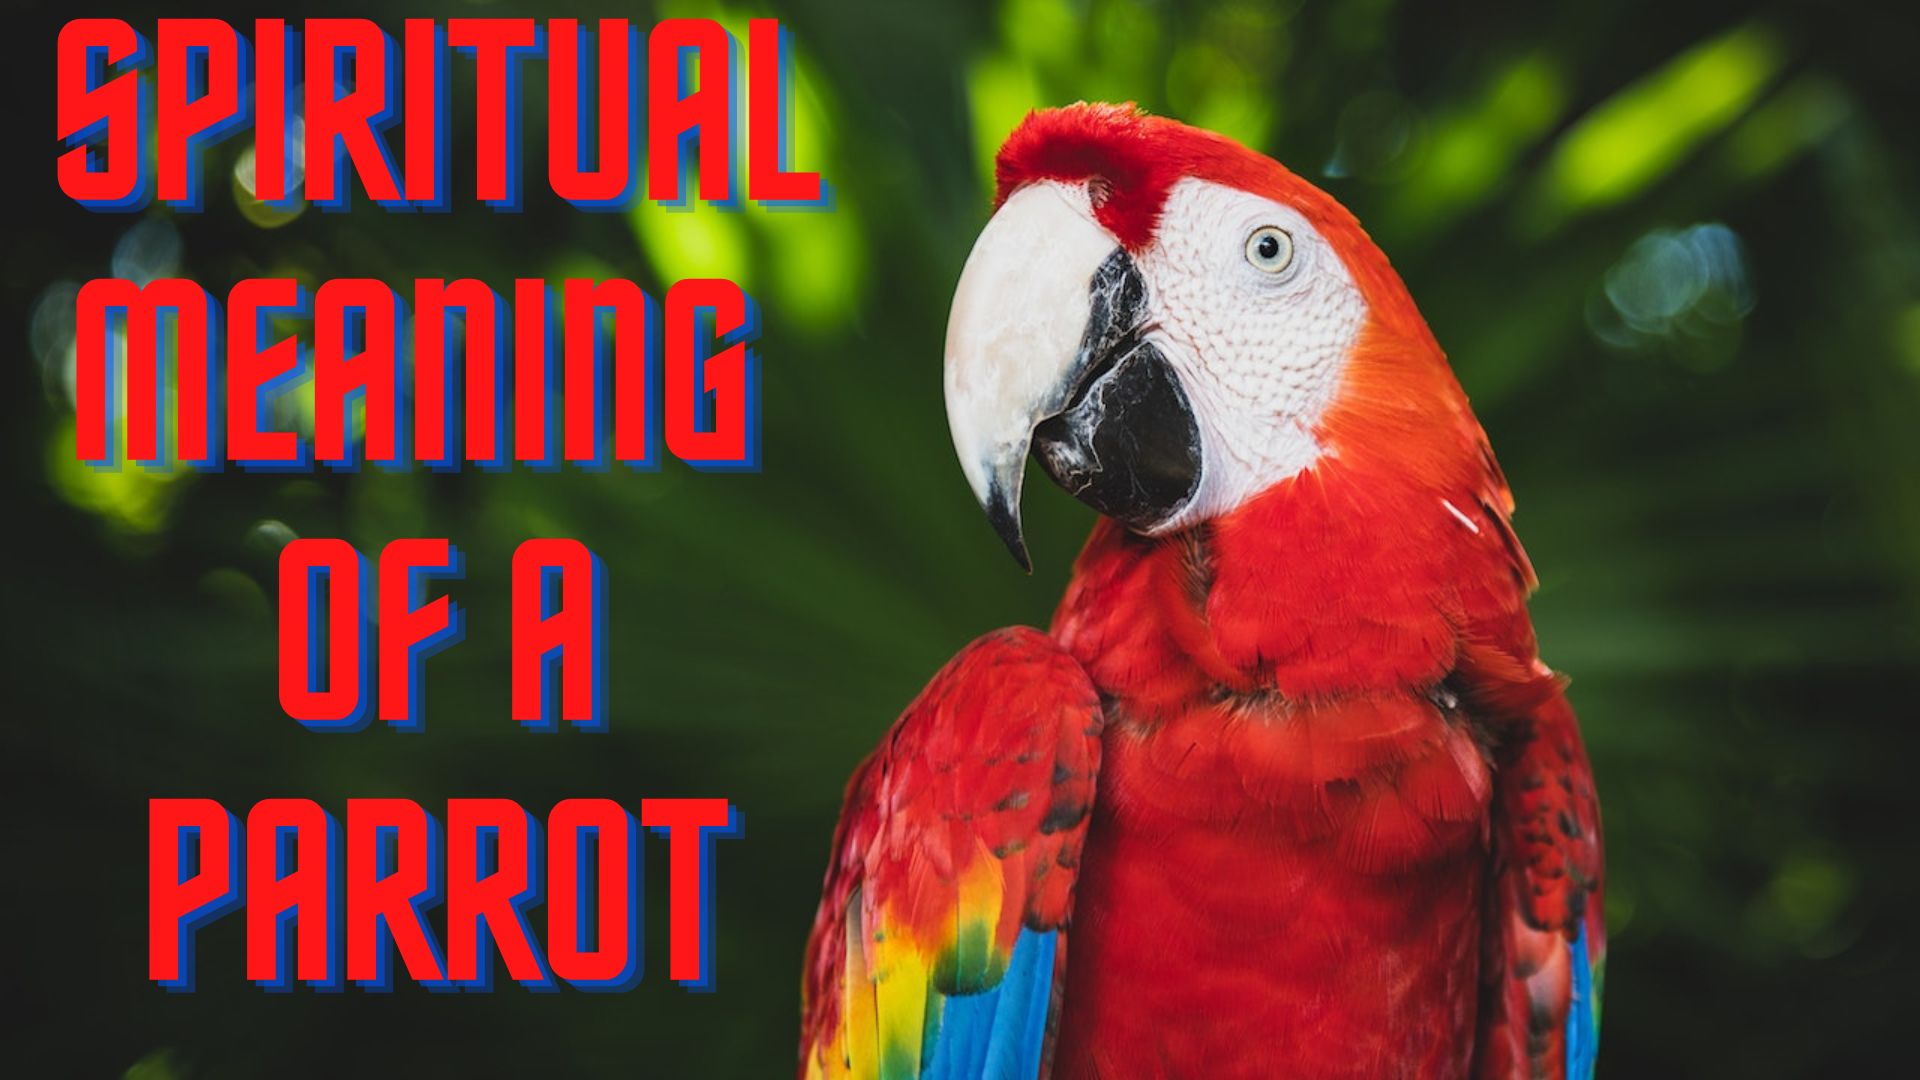 Spiritual Meaning Of A Parrot - Connection Between Nature And Spirit